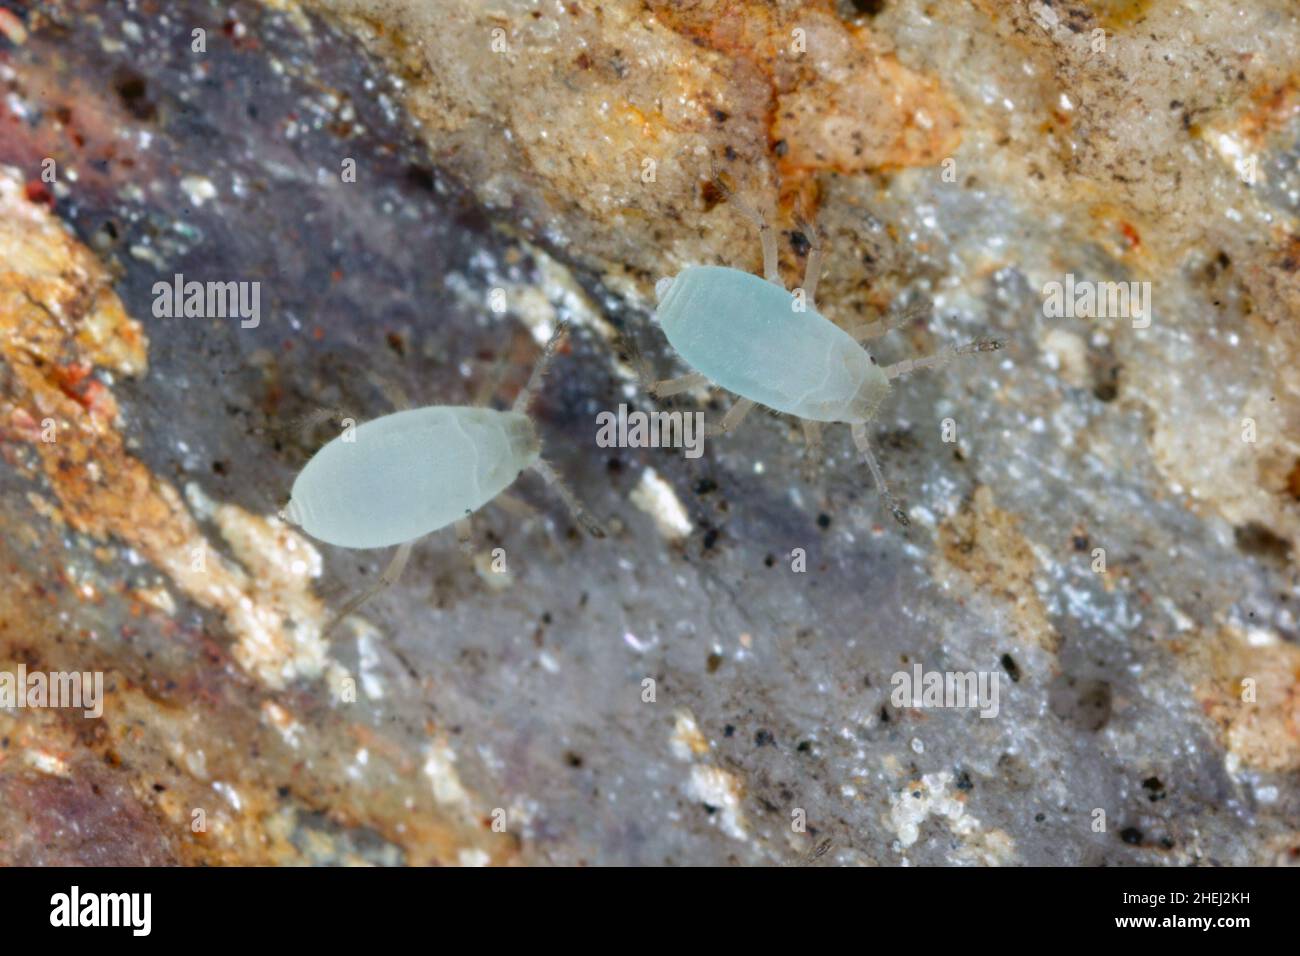 Underground aphids found under a stone in the garden. High magnification. Stock Photo